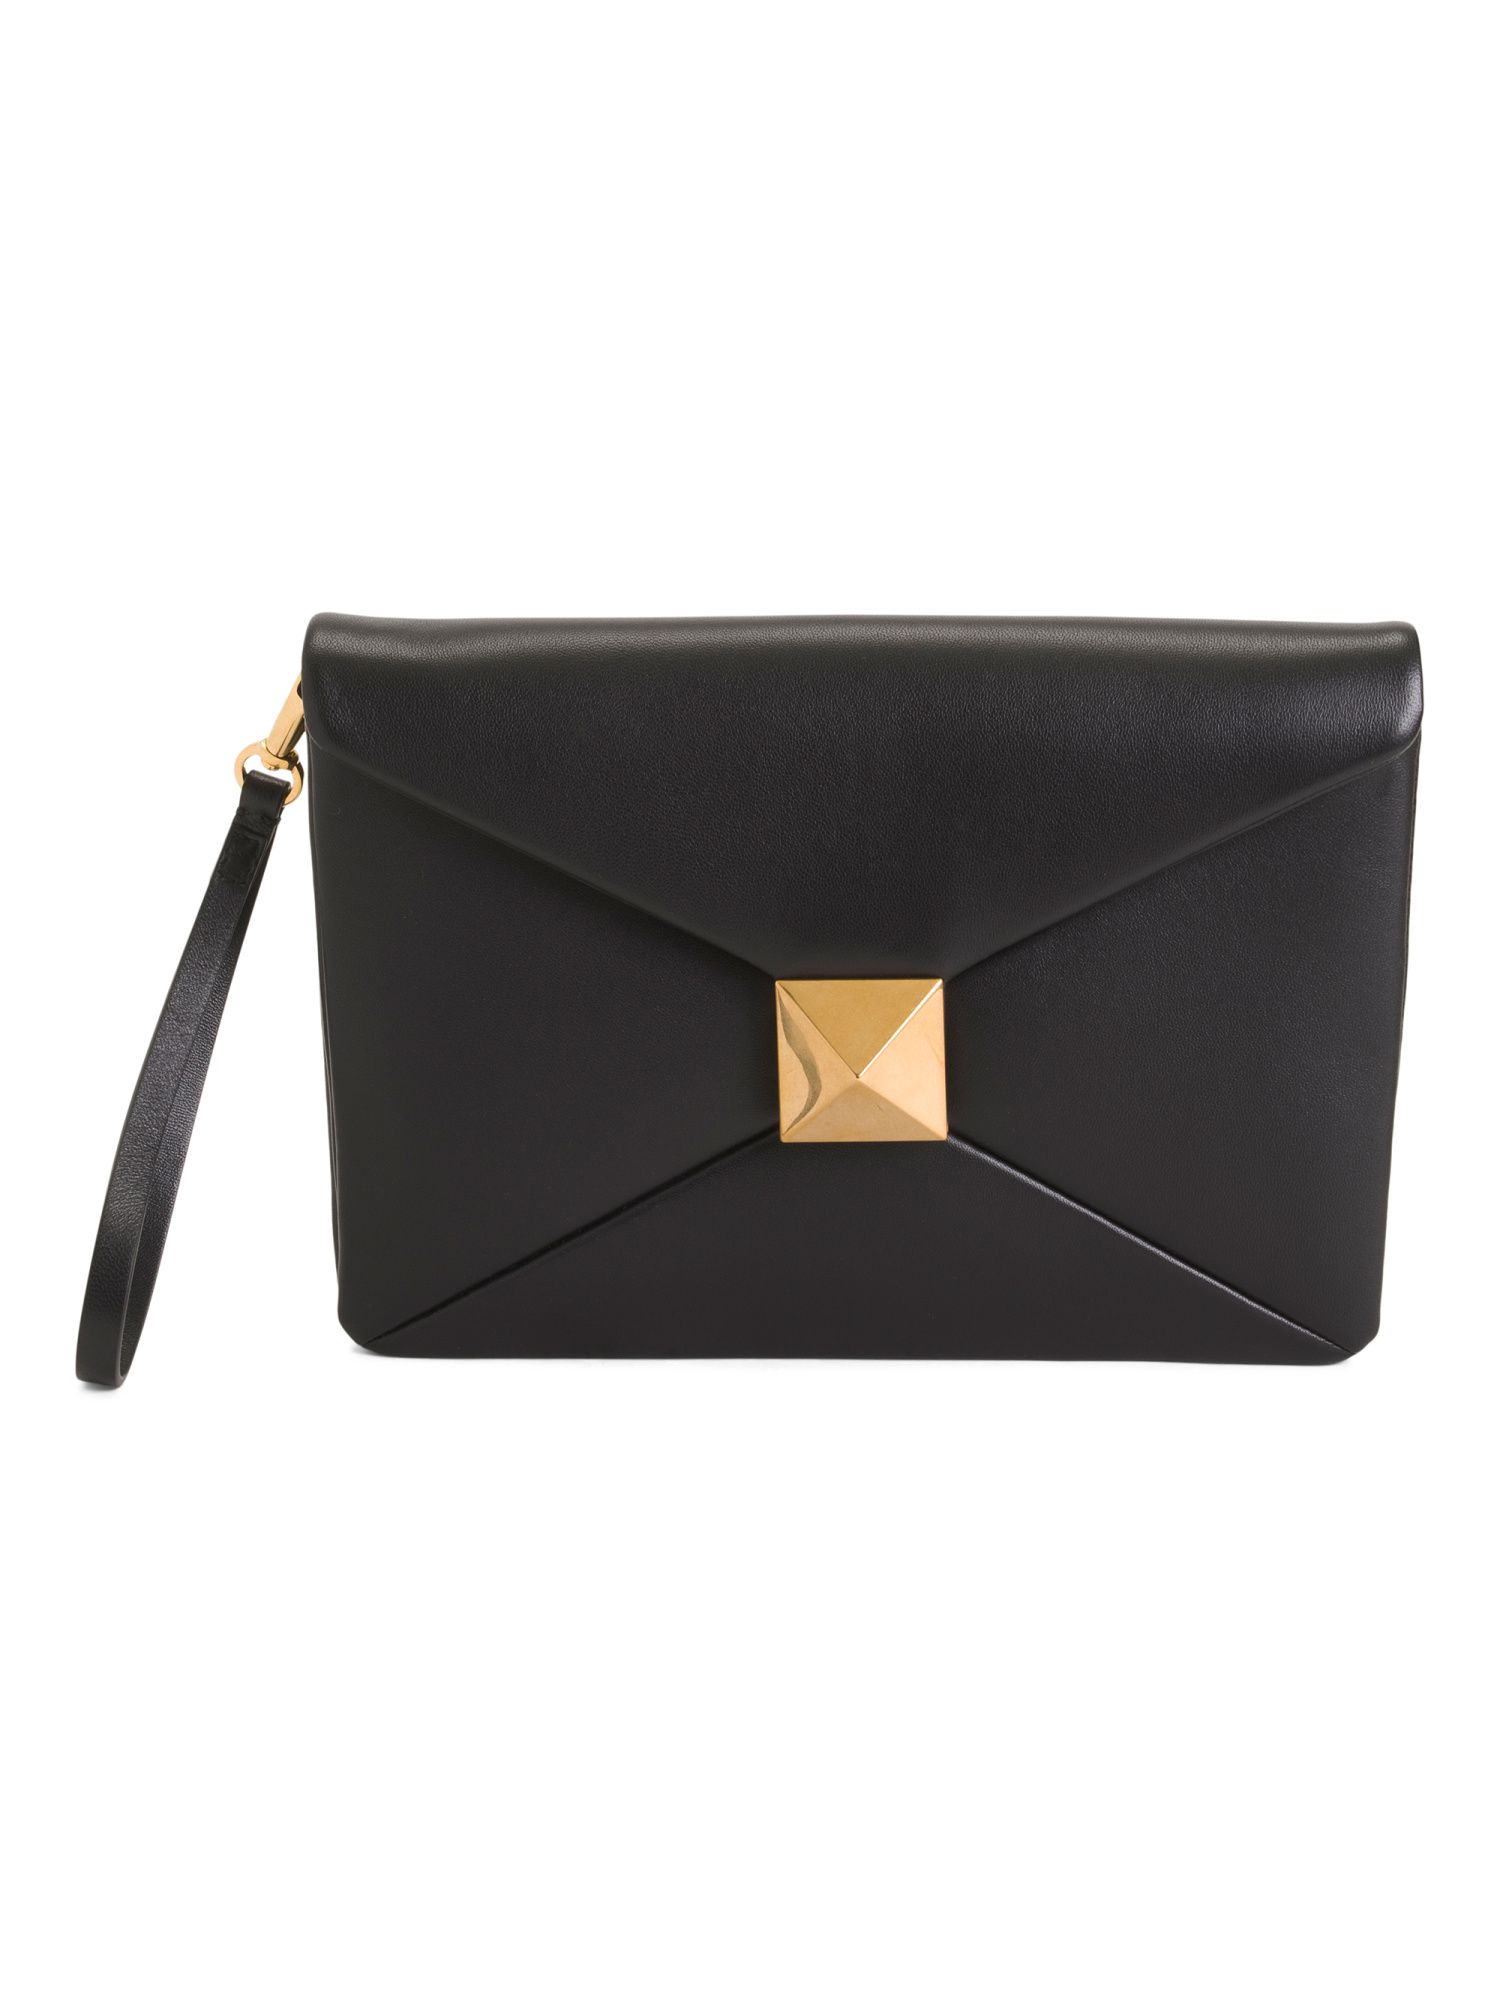 Made In Italy Leather One Stud Clutch Bag With Wristlet Strap | TJ Maxx